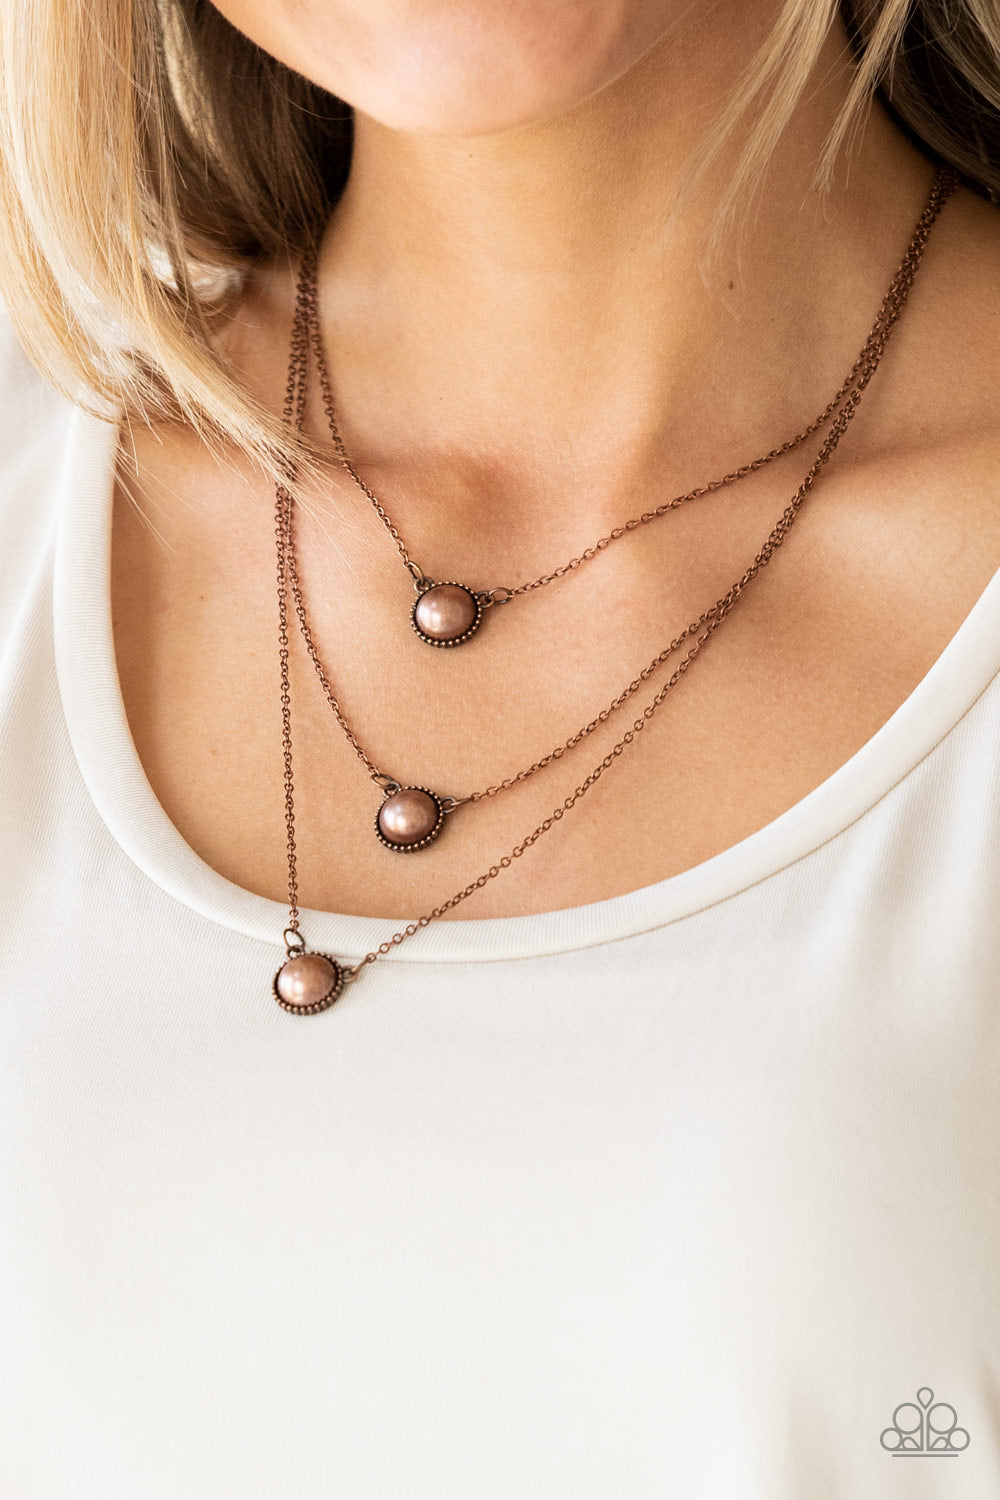 Paparazzi Necklace ~ A Love For Luster - Copper